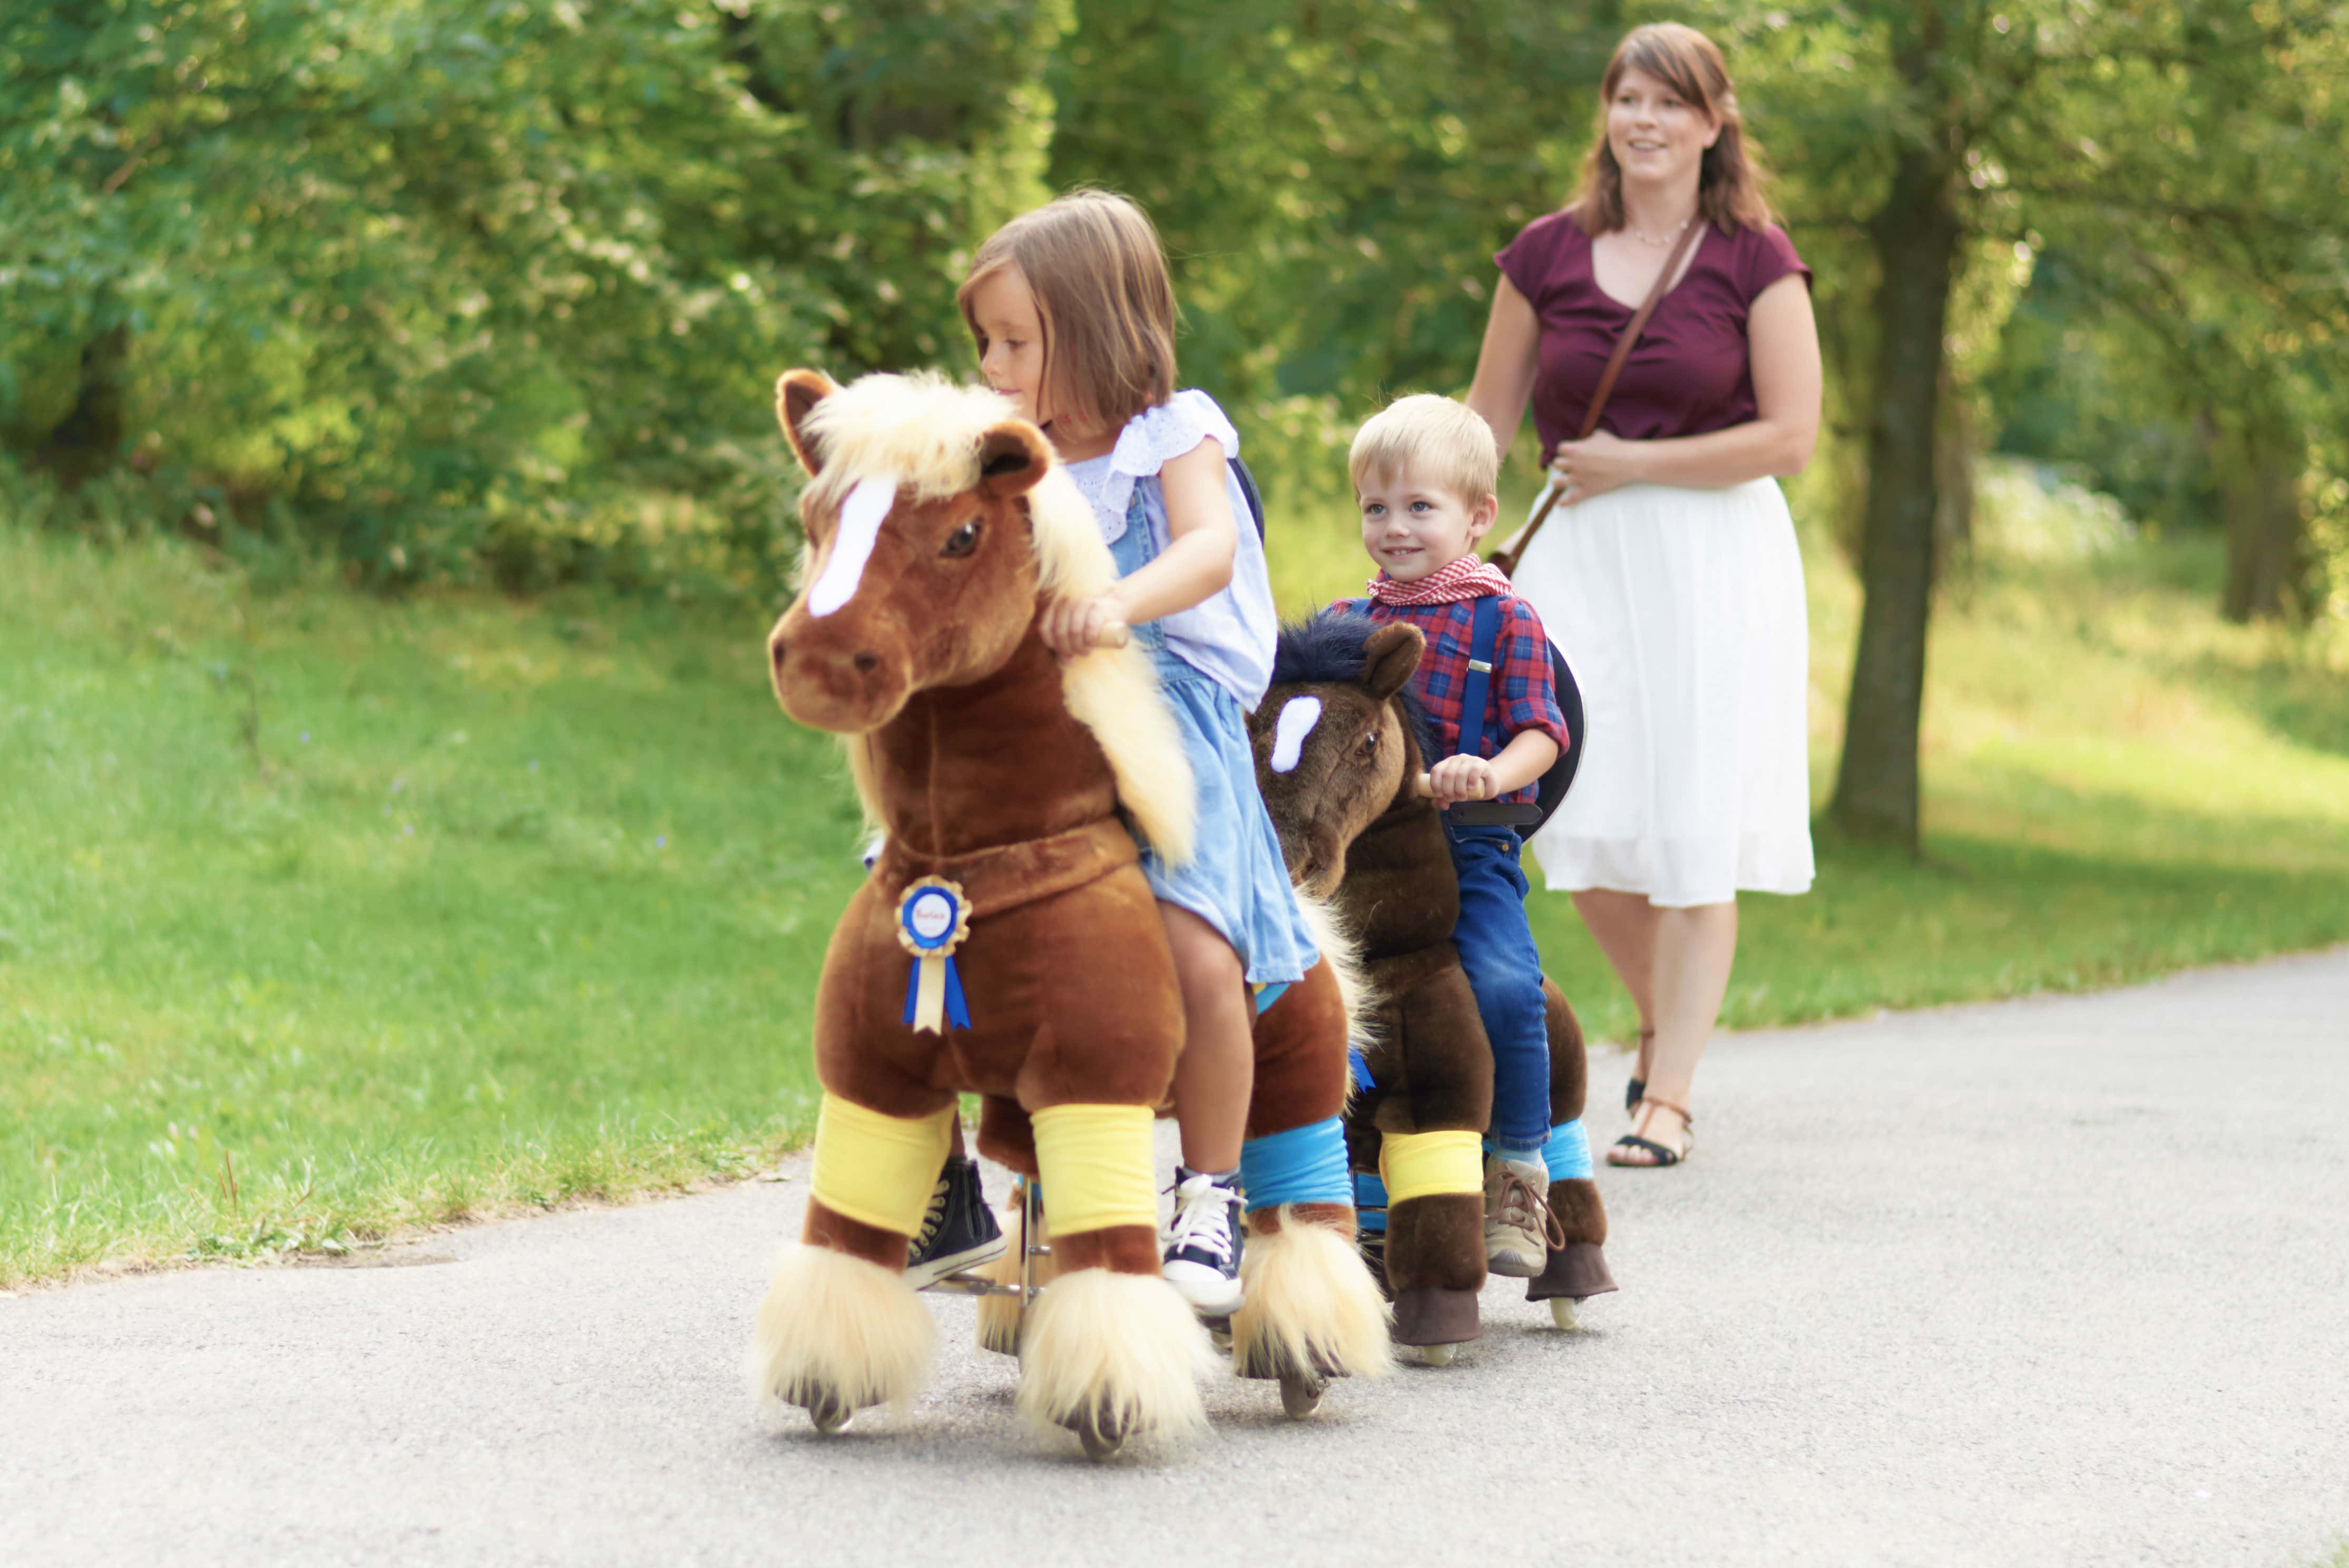 toy pony that you can ride